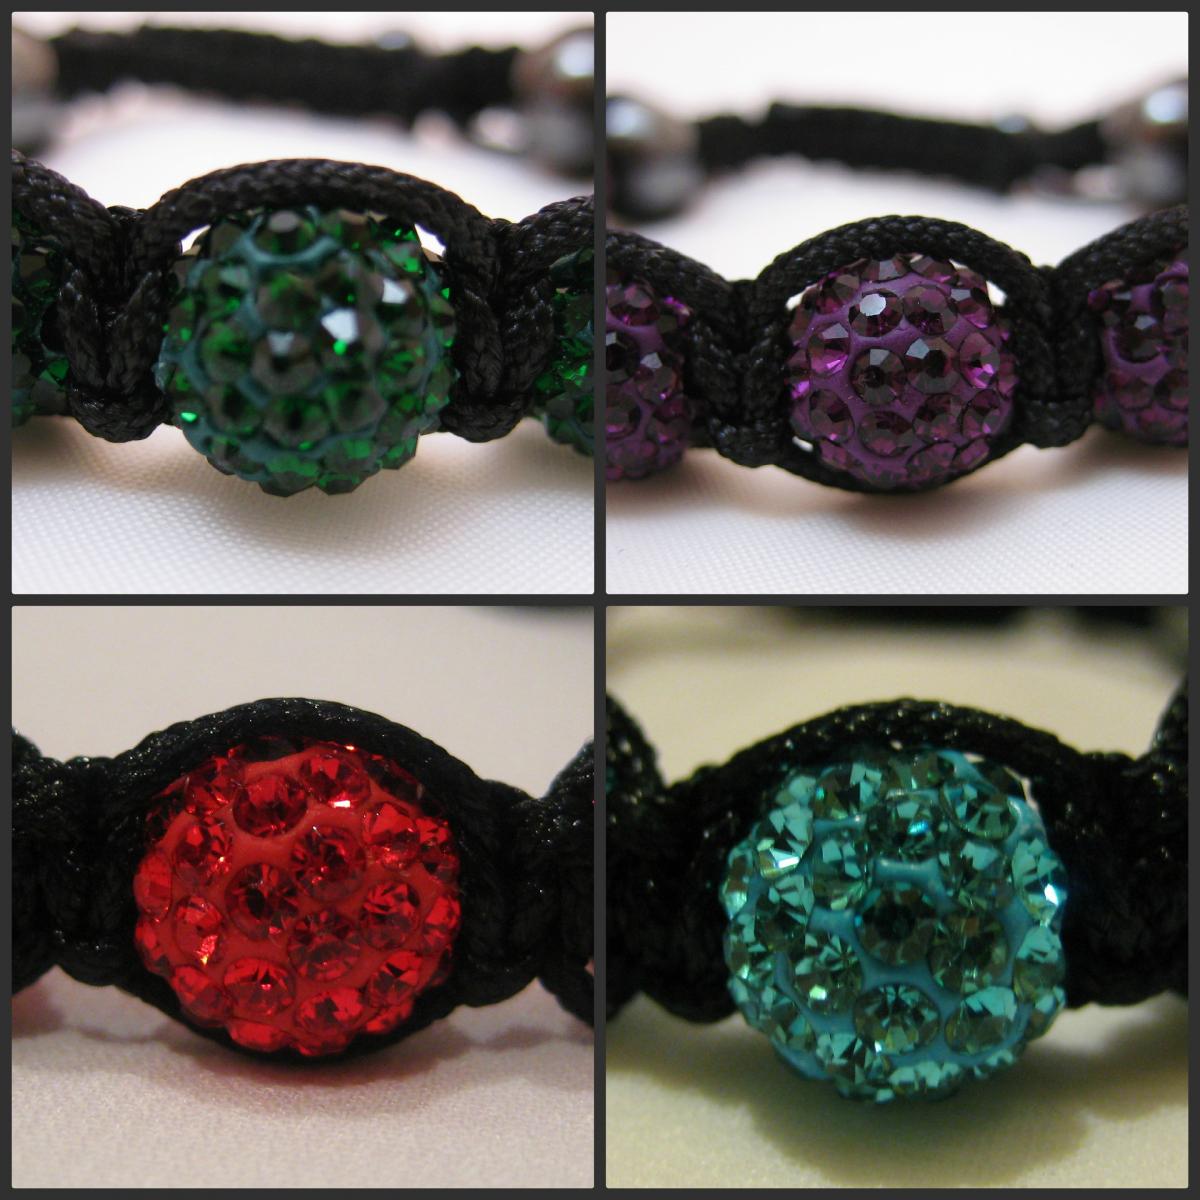 One Colour Range Emerald Green, Cherry Red. Purple And Turquoise Crystal Pave Bead Macrame Friendship Bracelets